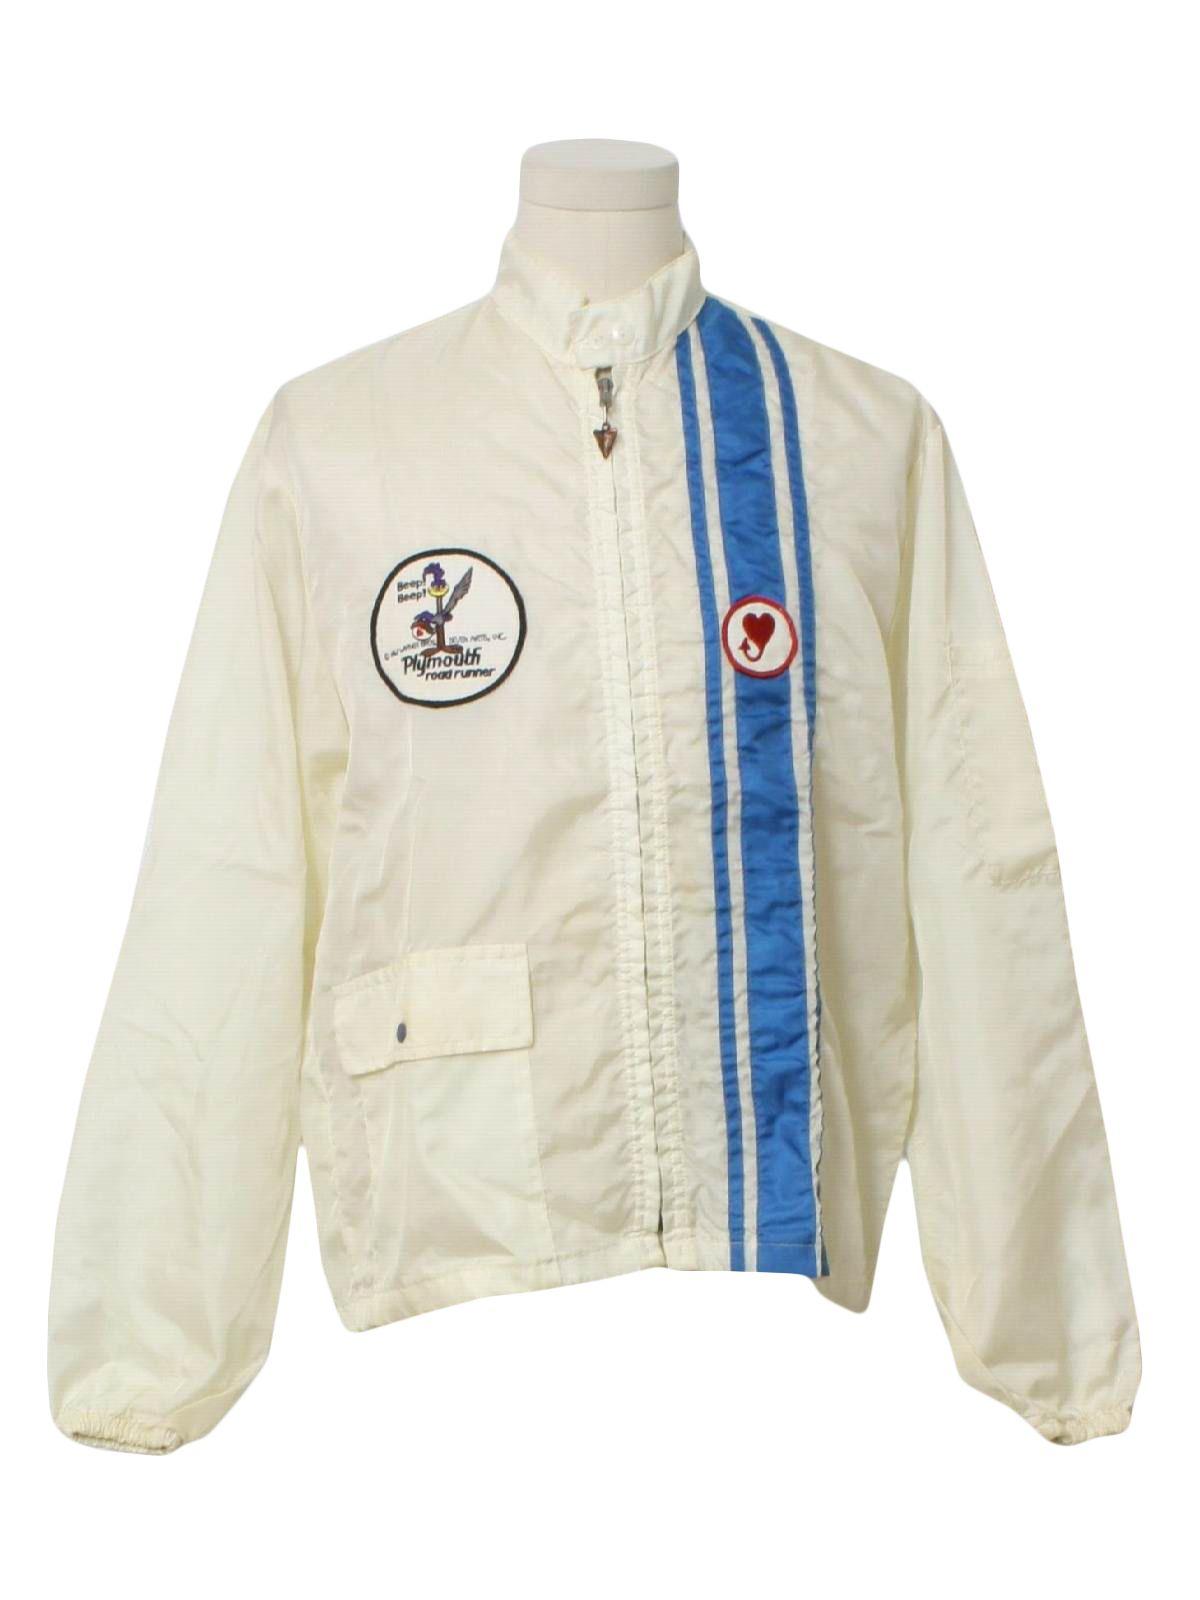 Plymouth Heart Logo - 60s Vintage Jacket: 60s -no label- Mens ivory background and blue ...